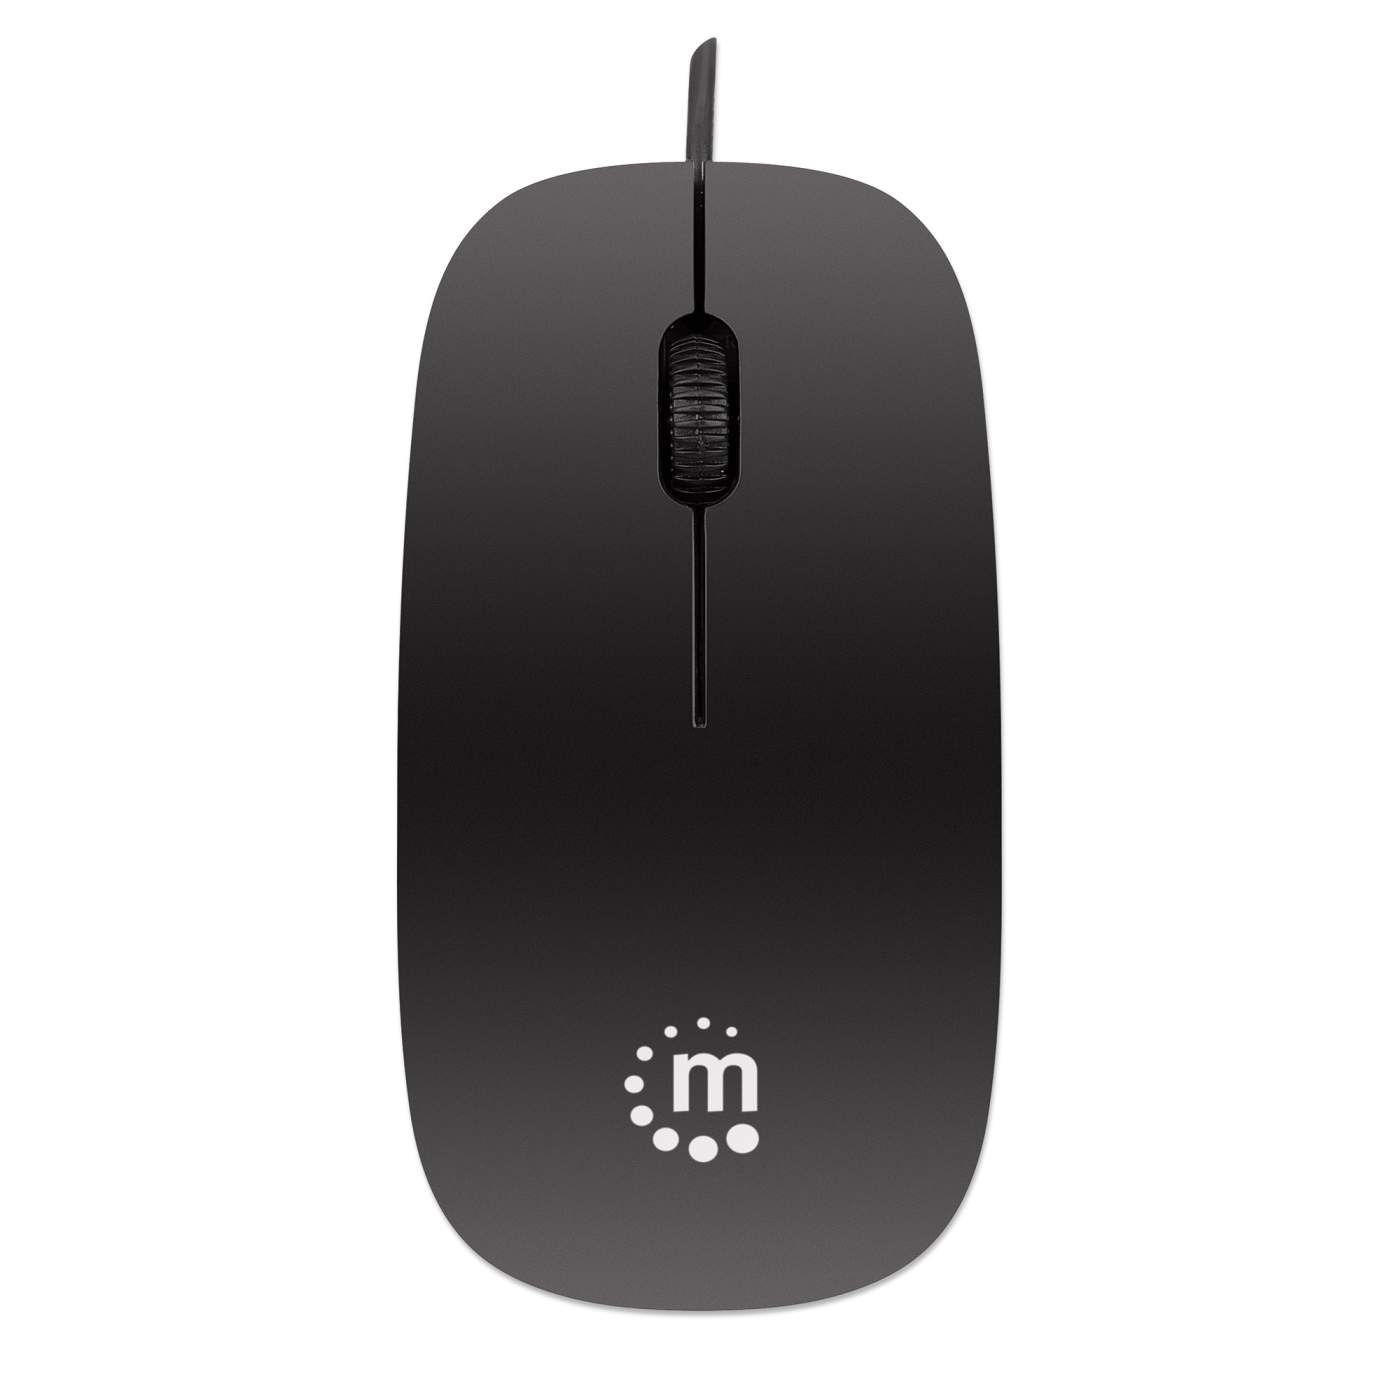 Silhouette Optical Mouse Image 4